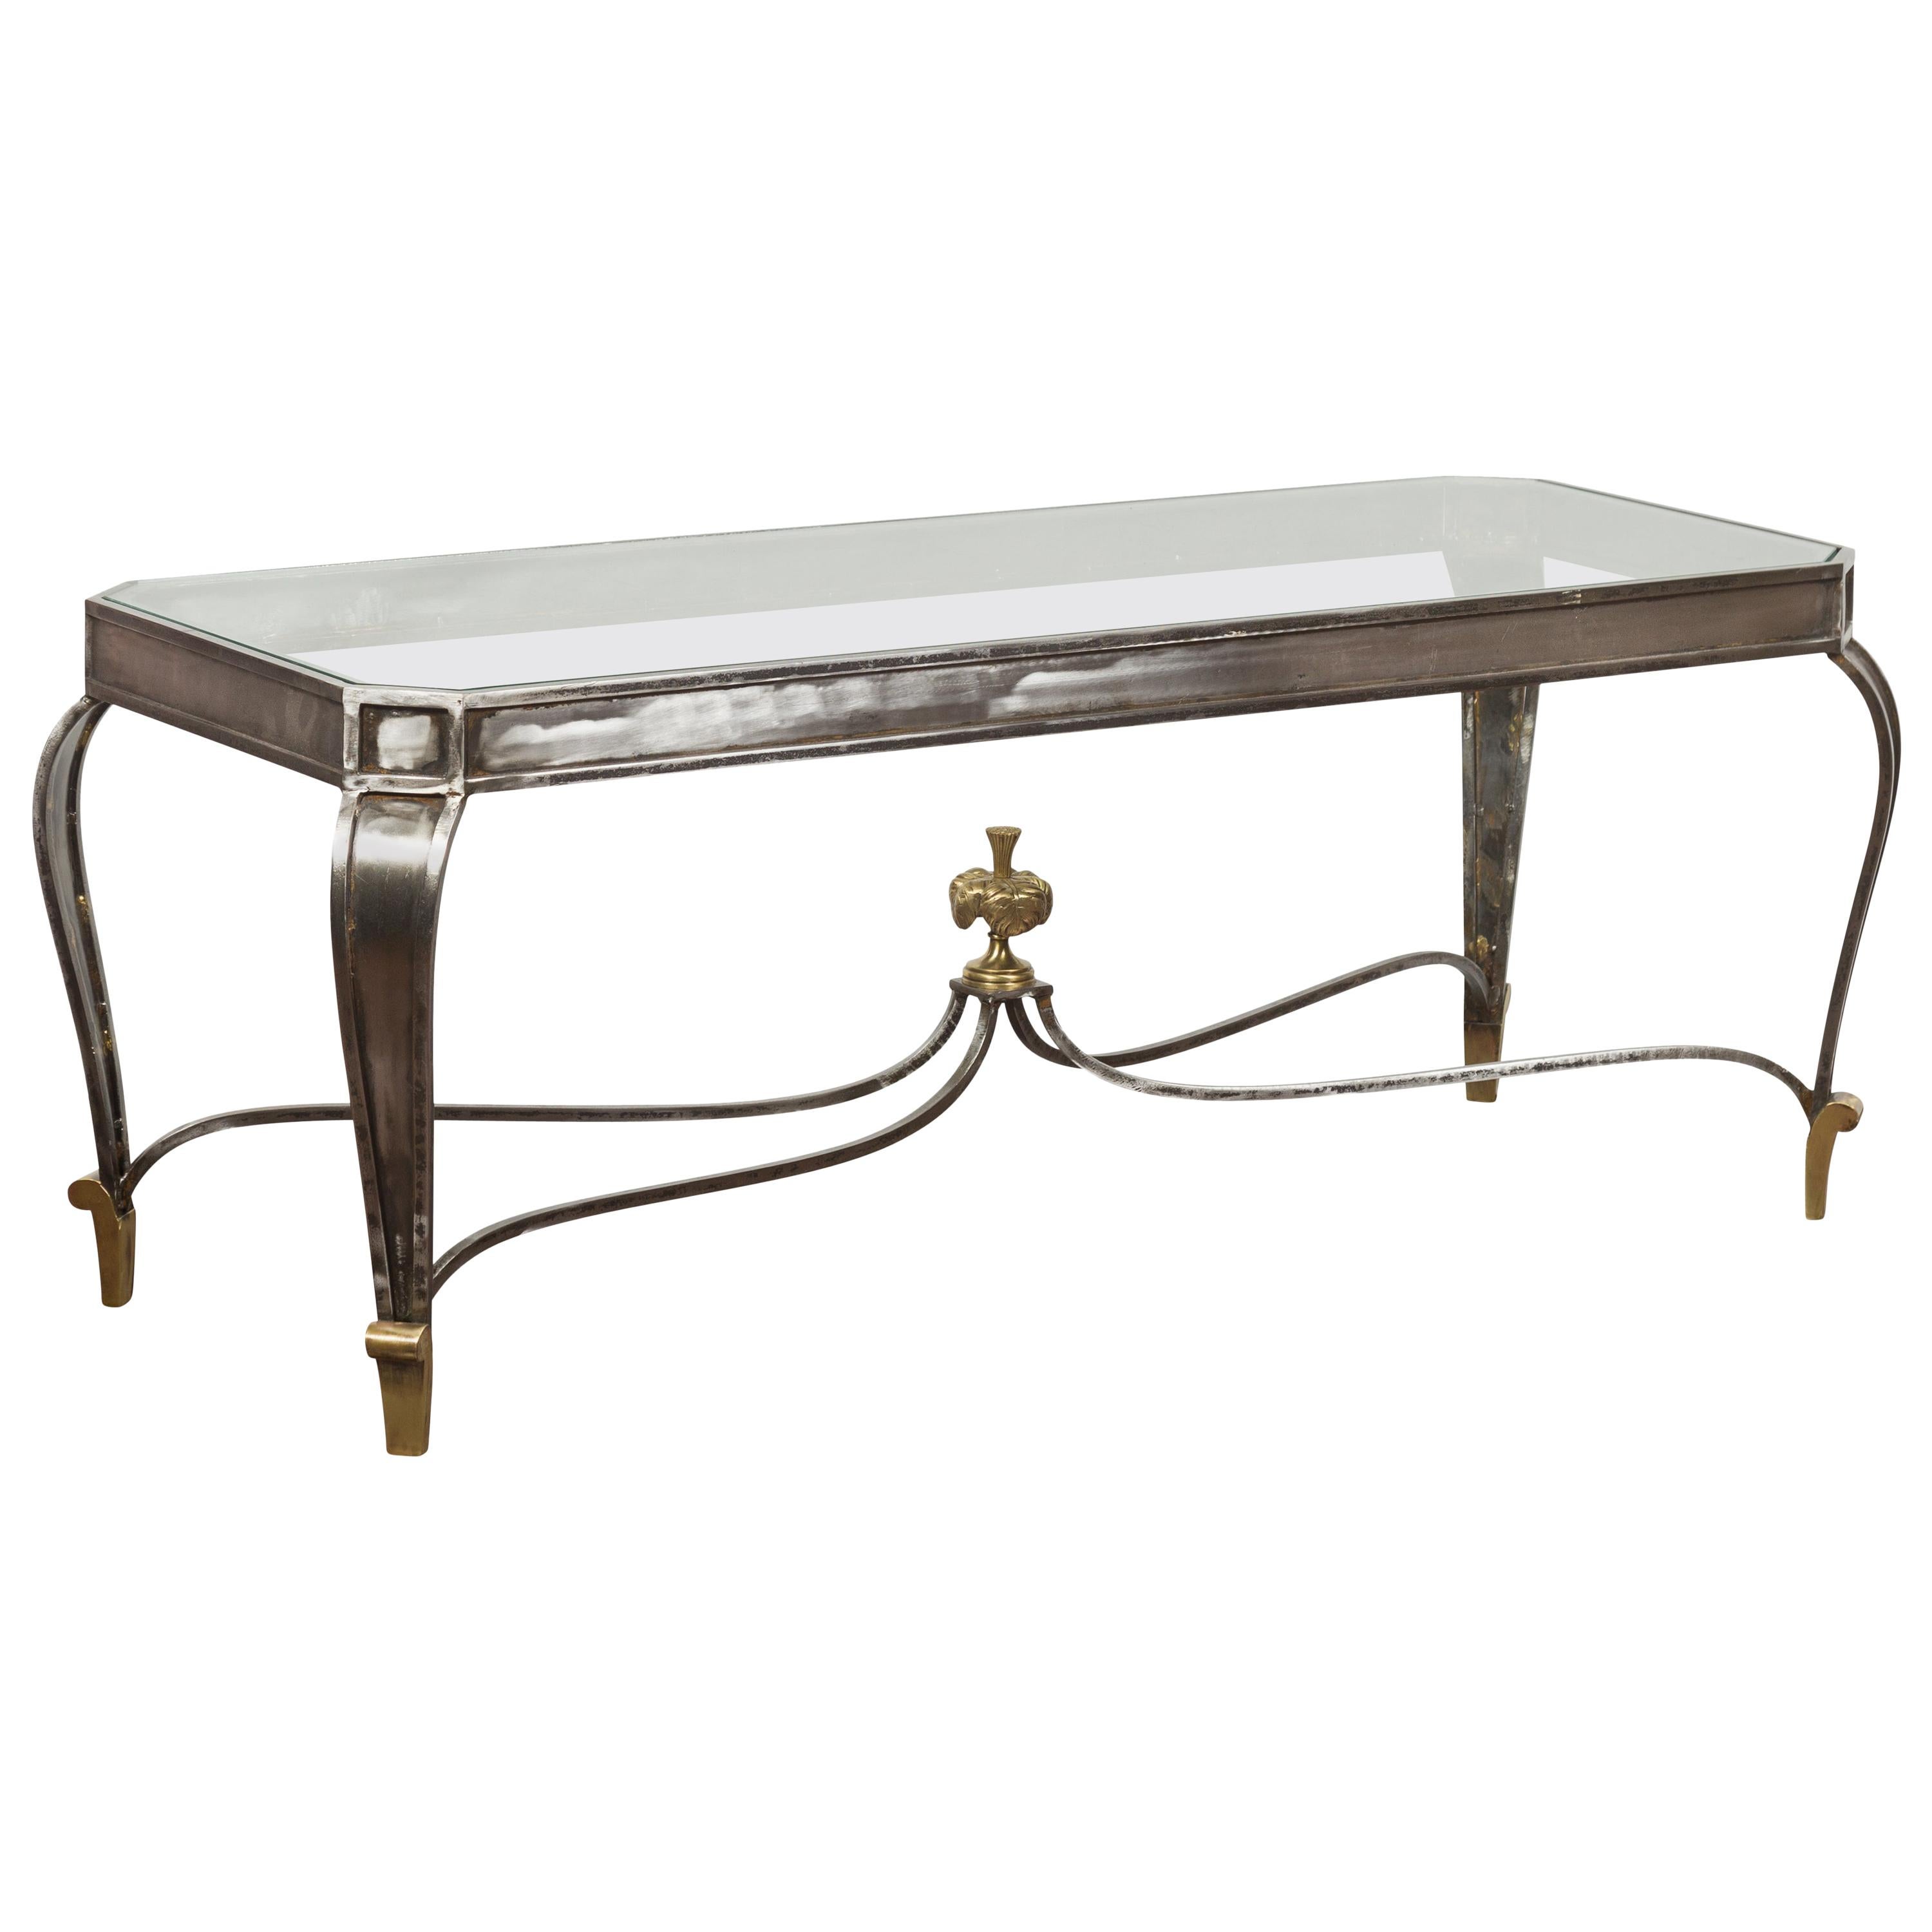 Italian Vintage Steel and Bronze Coffee Table with Glass Top and Feathery Finial